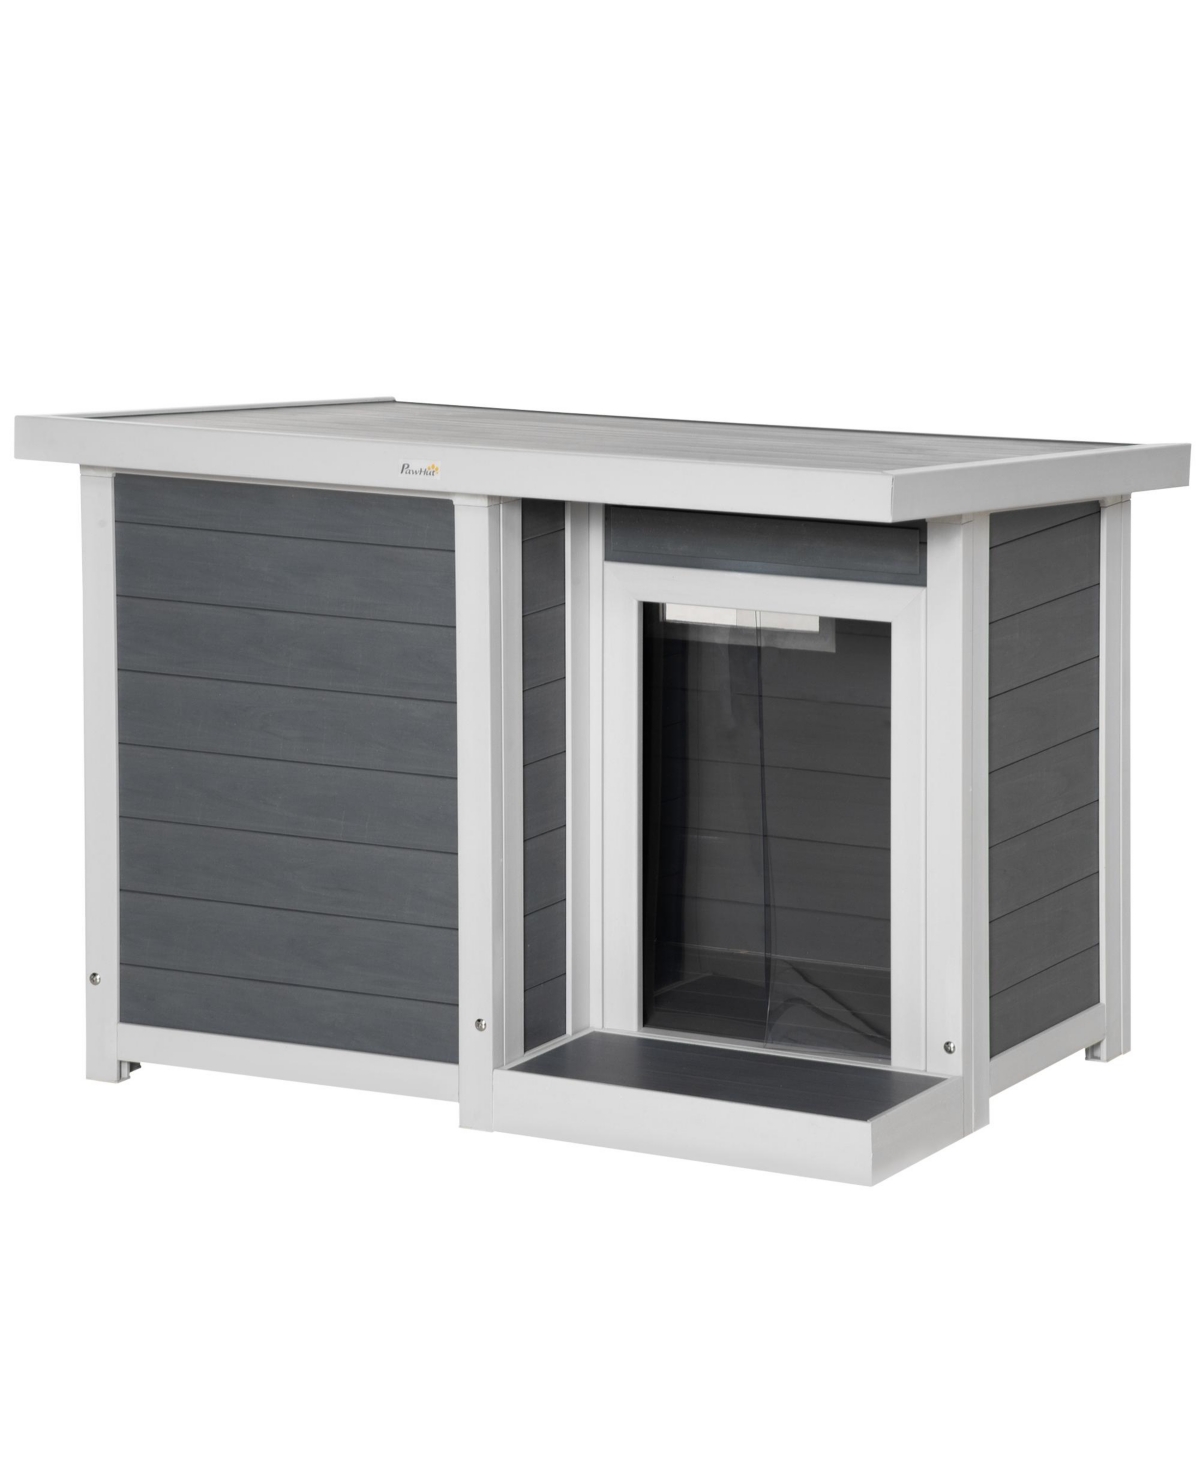 Dog House Outdoor with Openable Top, Raised Weather Resistant Dog Shelter with Front Door, Pvc Curtain, Porch for Medium Sized Dog, Gray - Grey